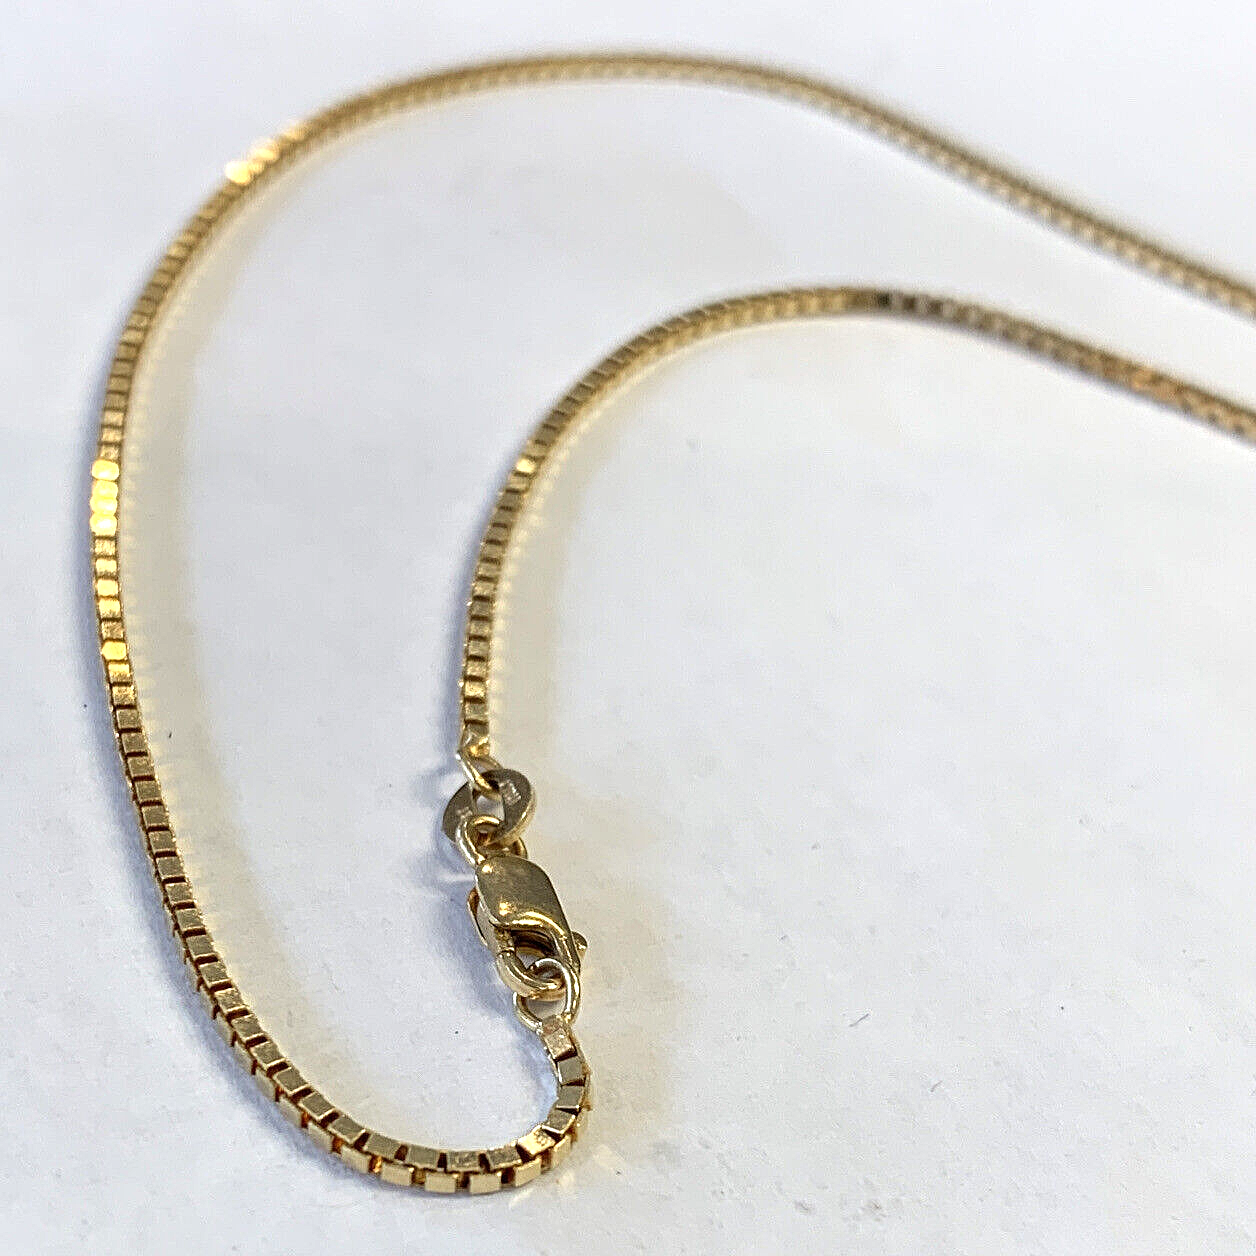 14k Gold Italy Box Link Chain - 16 Inch - 5.2 Grams - 1.3mm